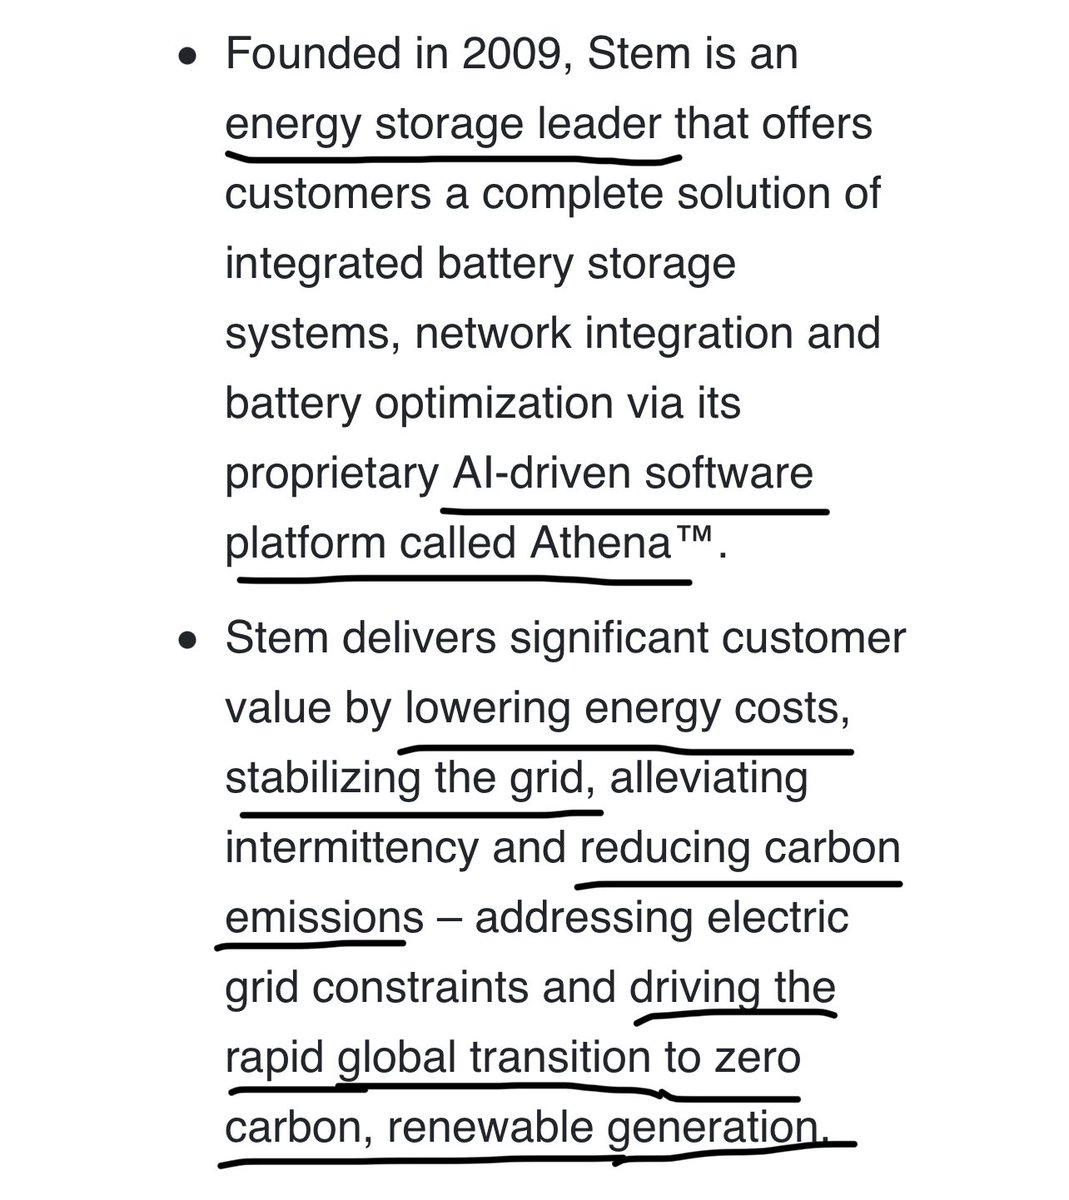  $STPKStem “builds and operates the largest digitally connected energy storage network for our customers. Our world class AI platform optimizes the value of our customers’ energy assets and facilitates their participation in energy markets” 